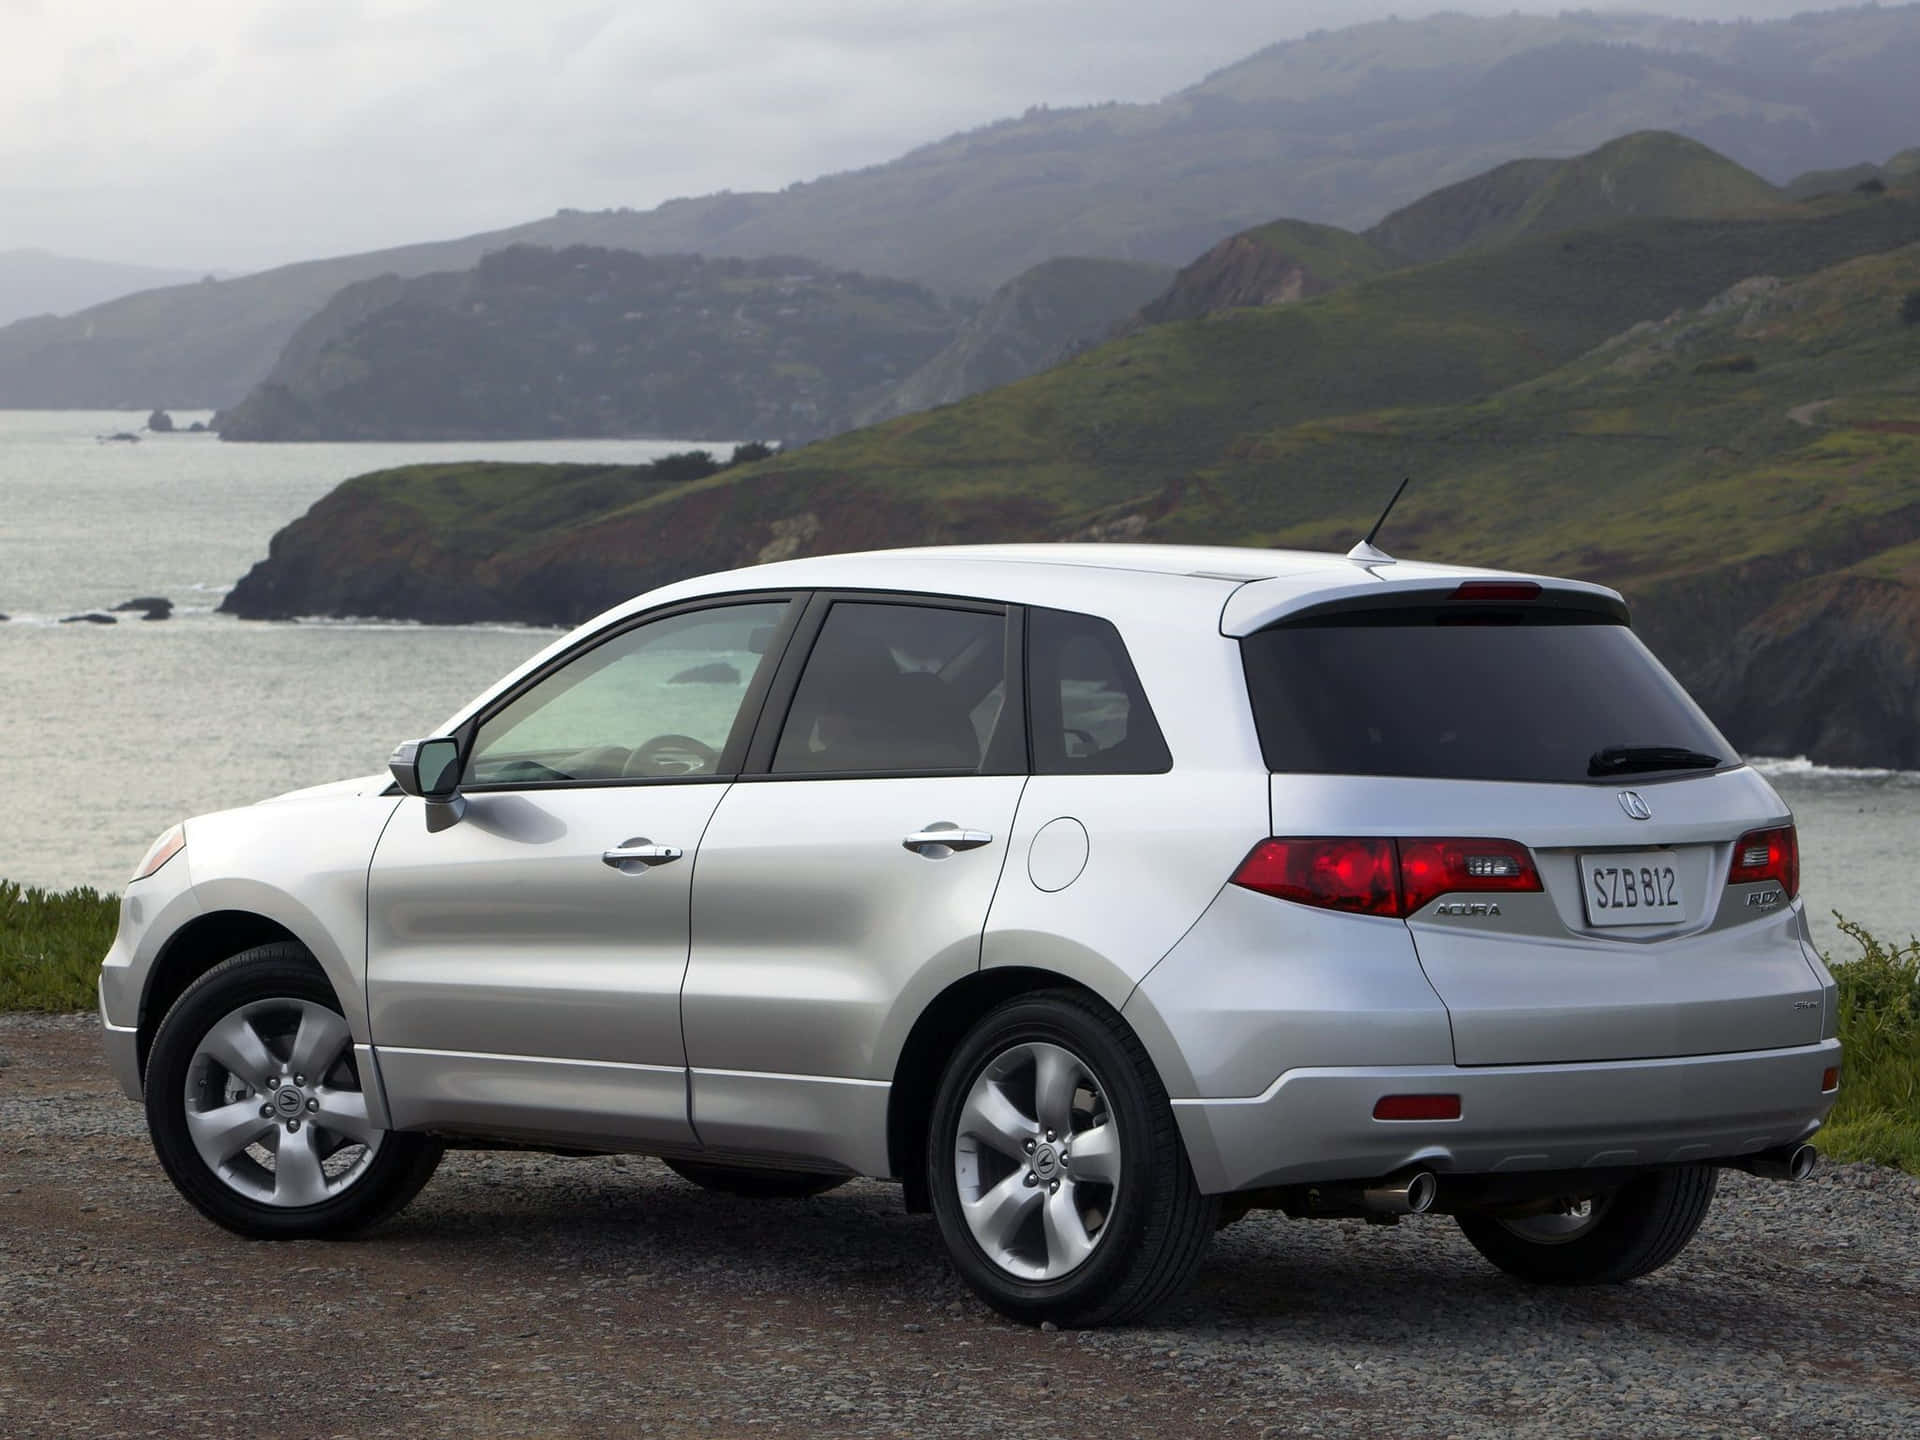 Acura RDX: Luxury Crossover SUV on the Road Wallpaper